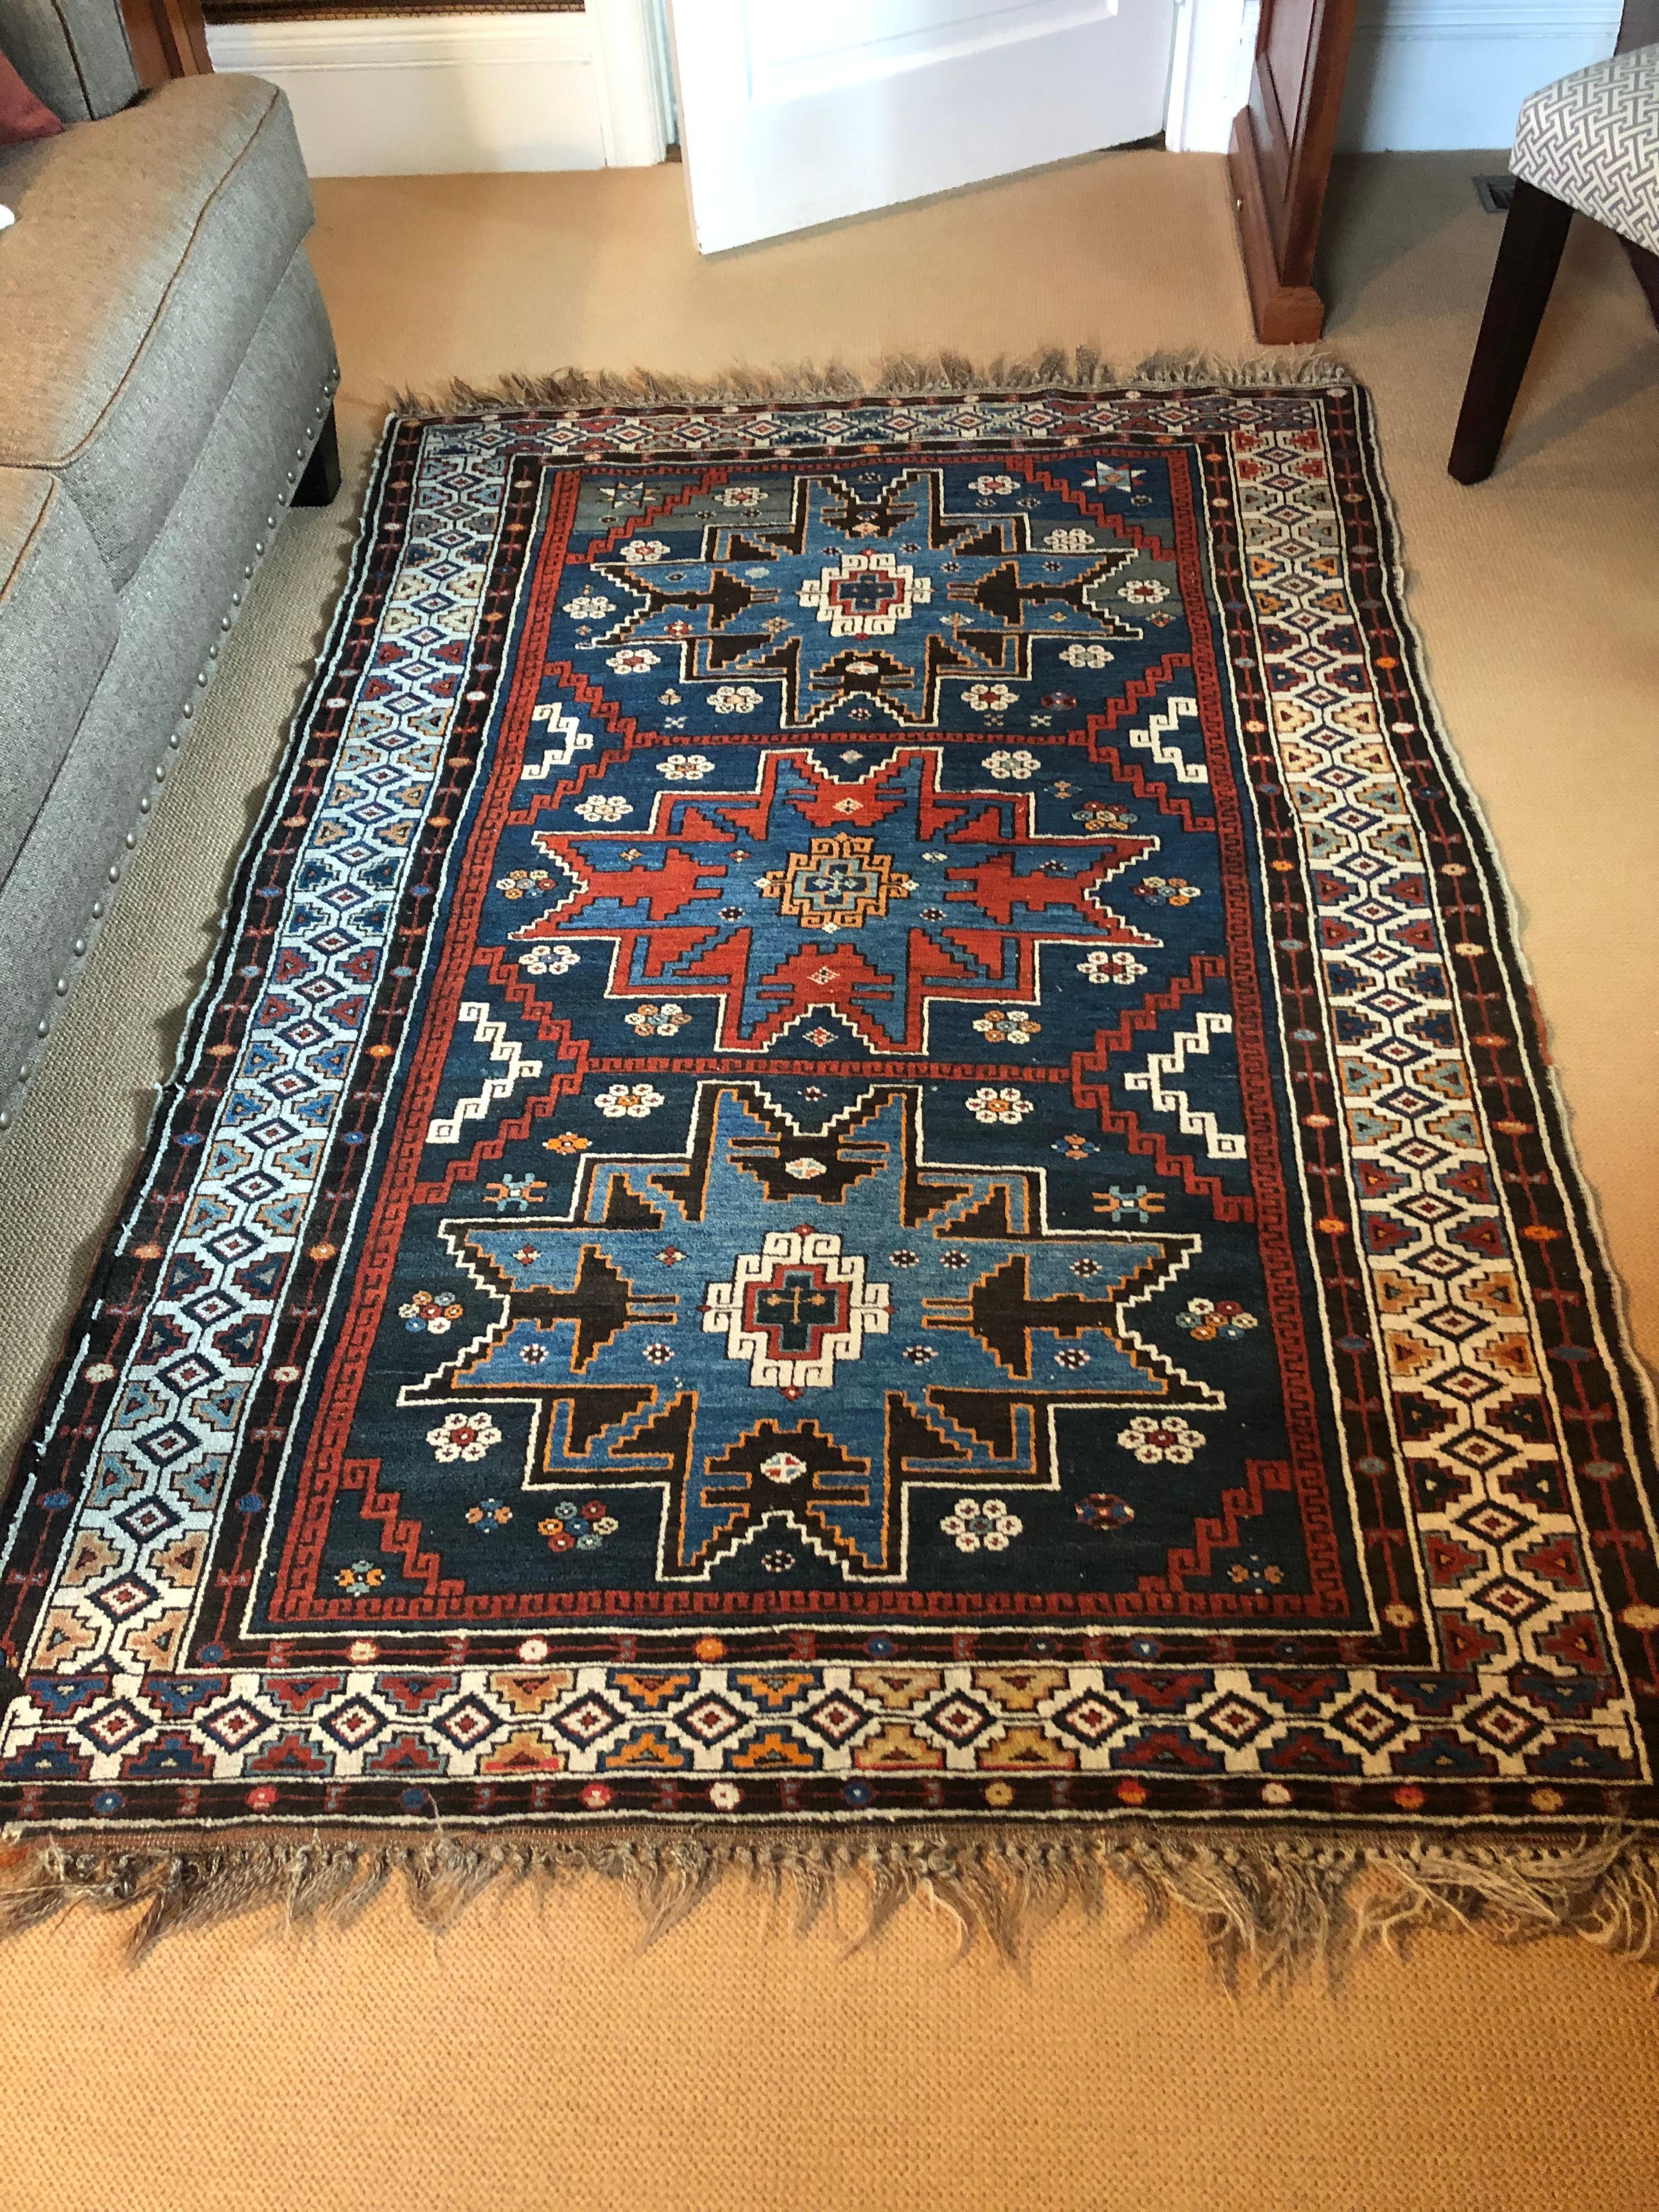 Early 20th Century Richly Patterned Antique Area Rug in Blues and Cranberry